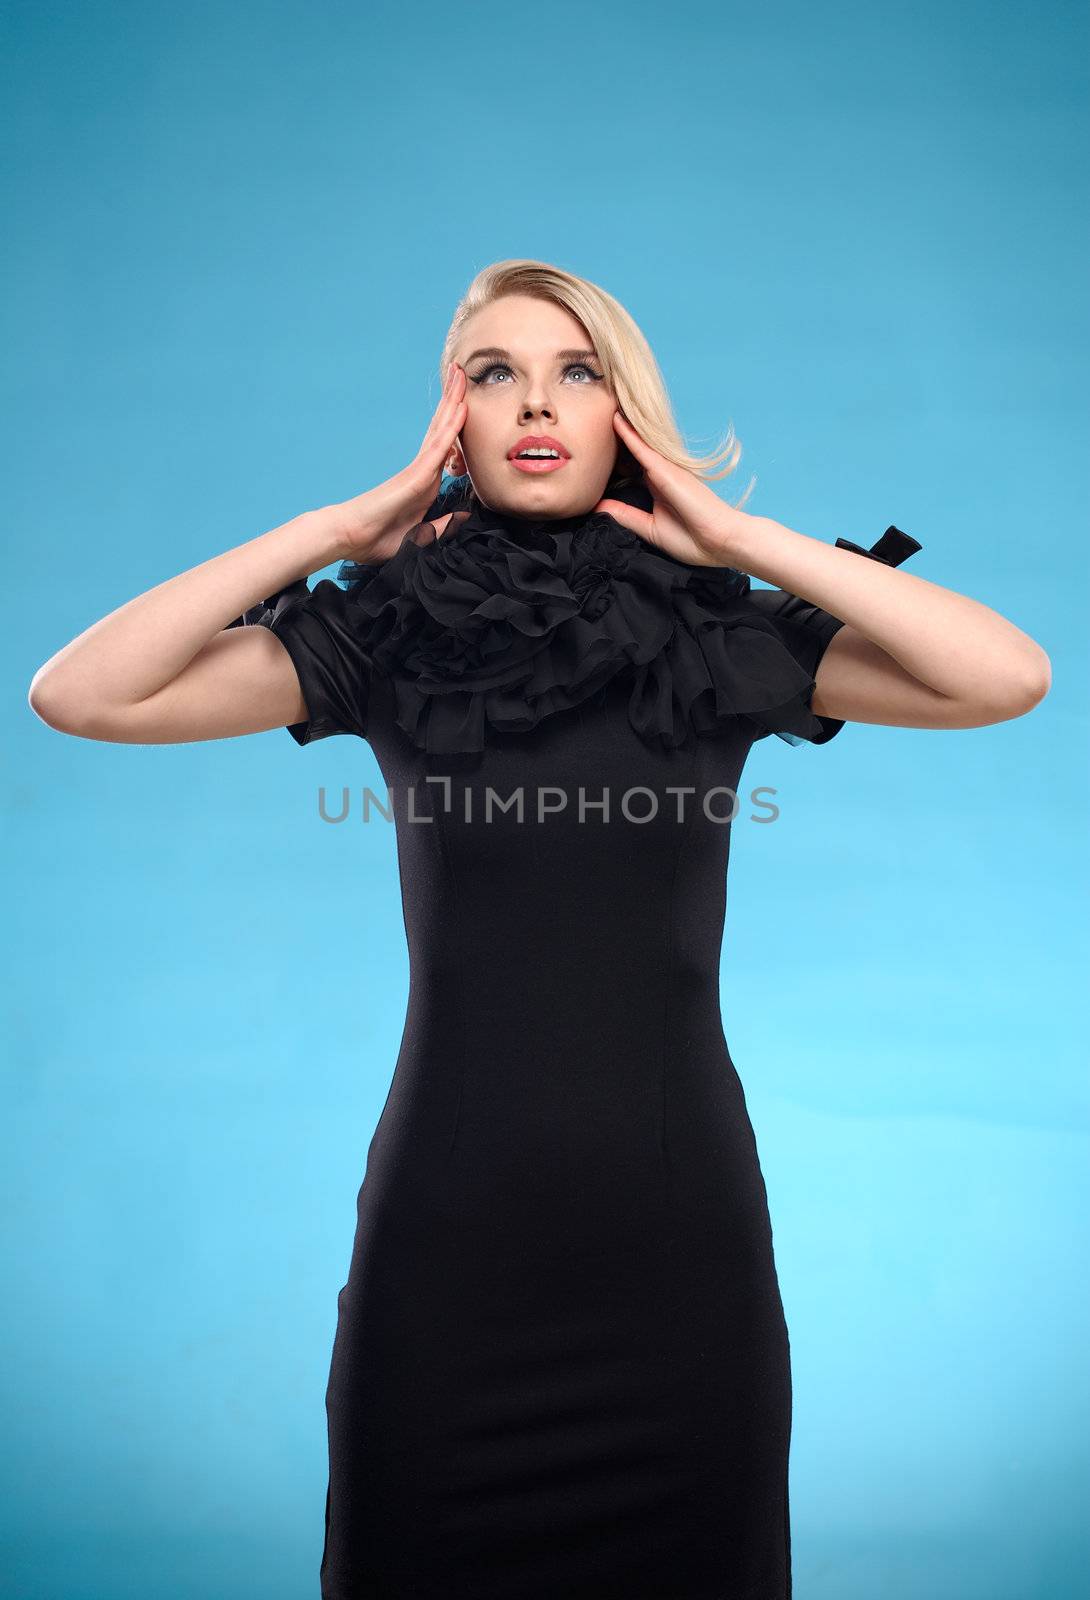 Blond woman with black formal dress by kirs-ua